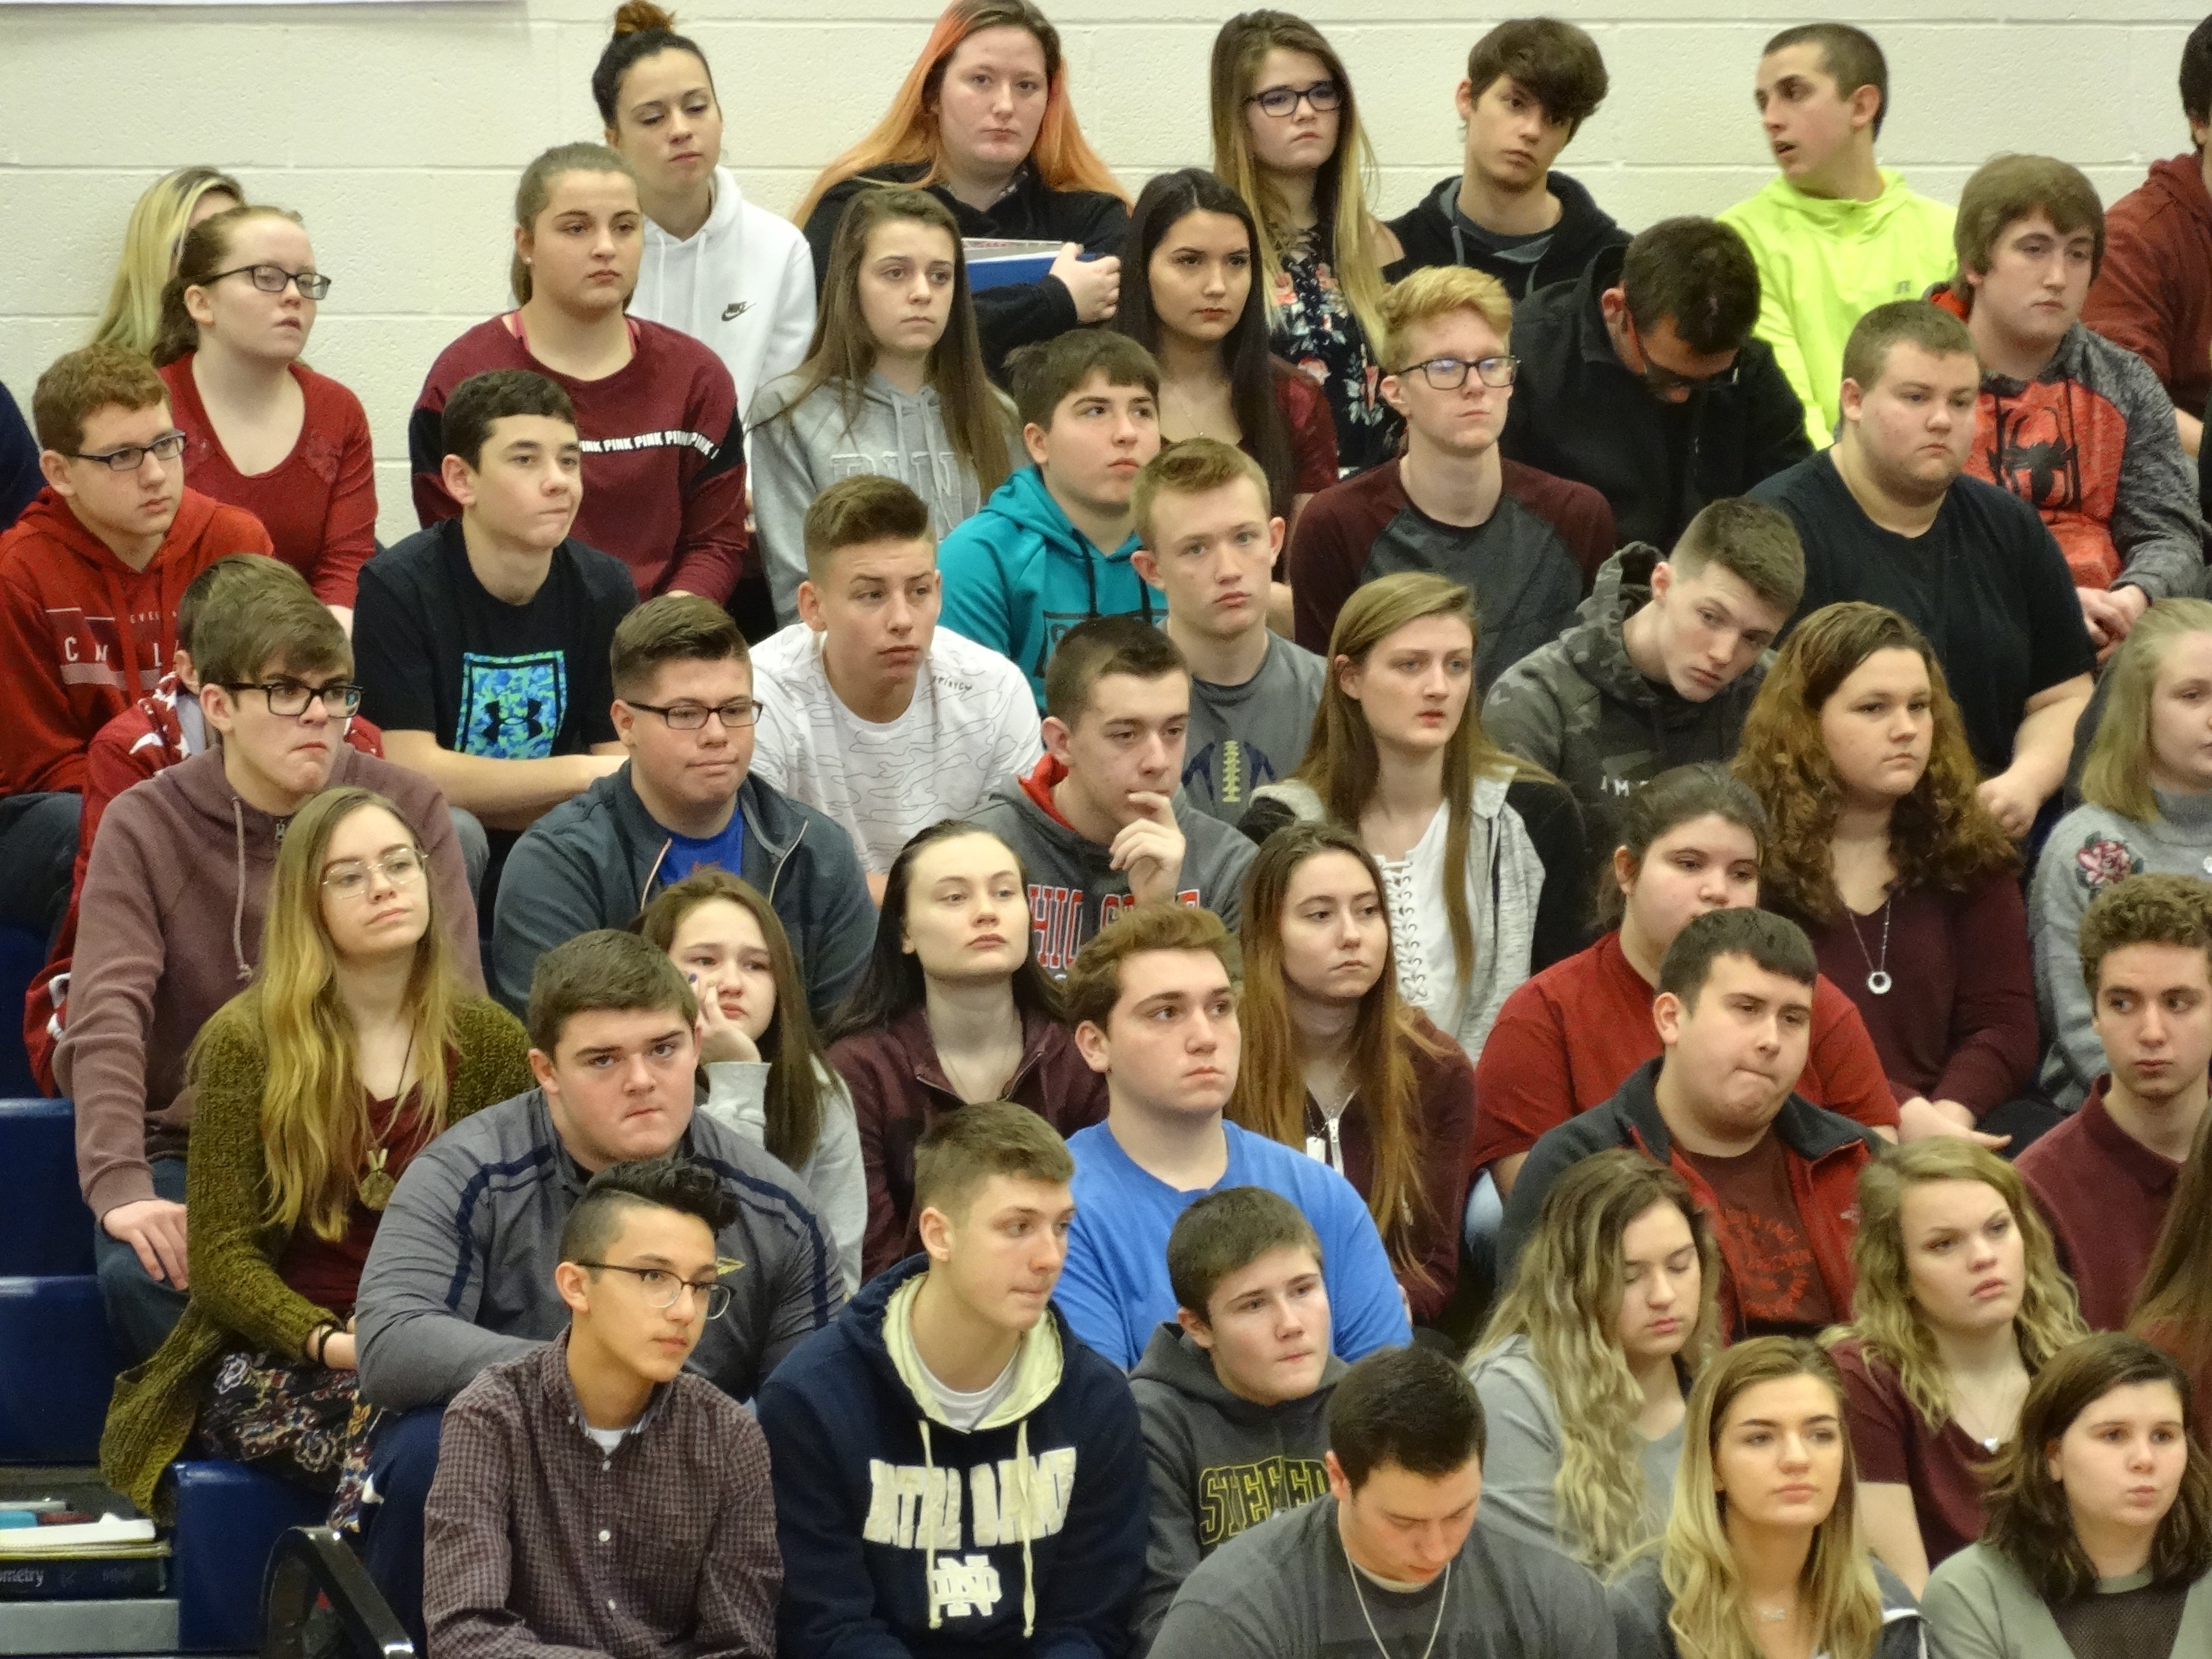 These students participated in Brookfielc High School's National Walkout Day observance March 14.